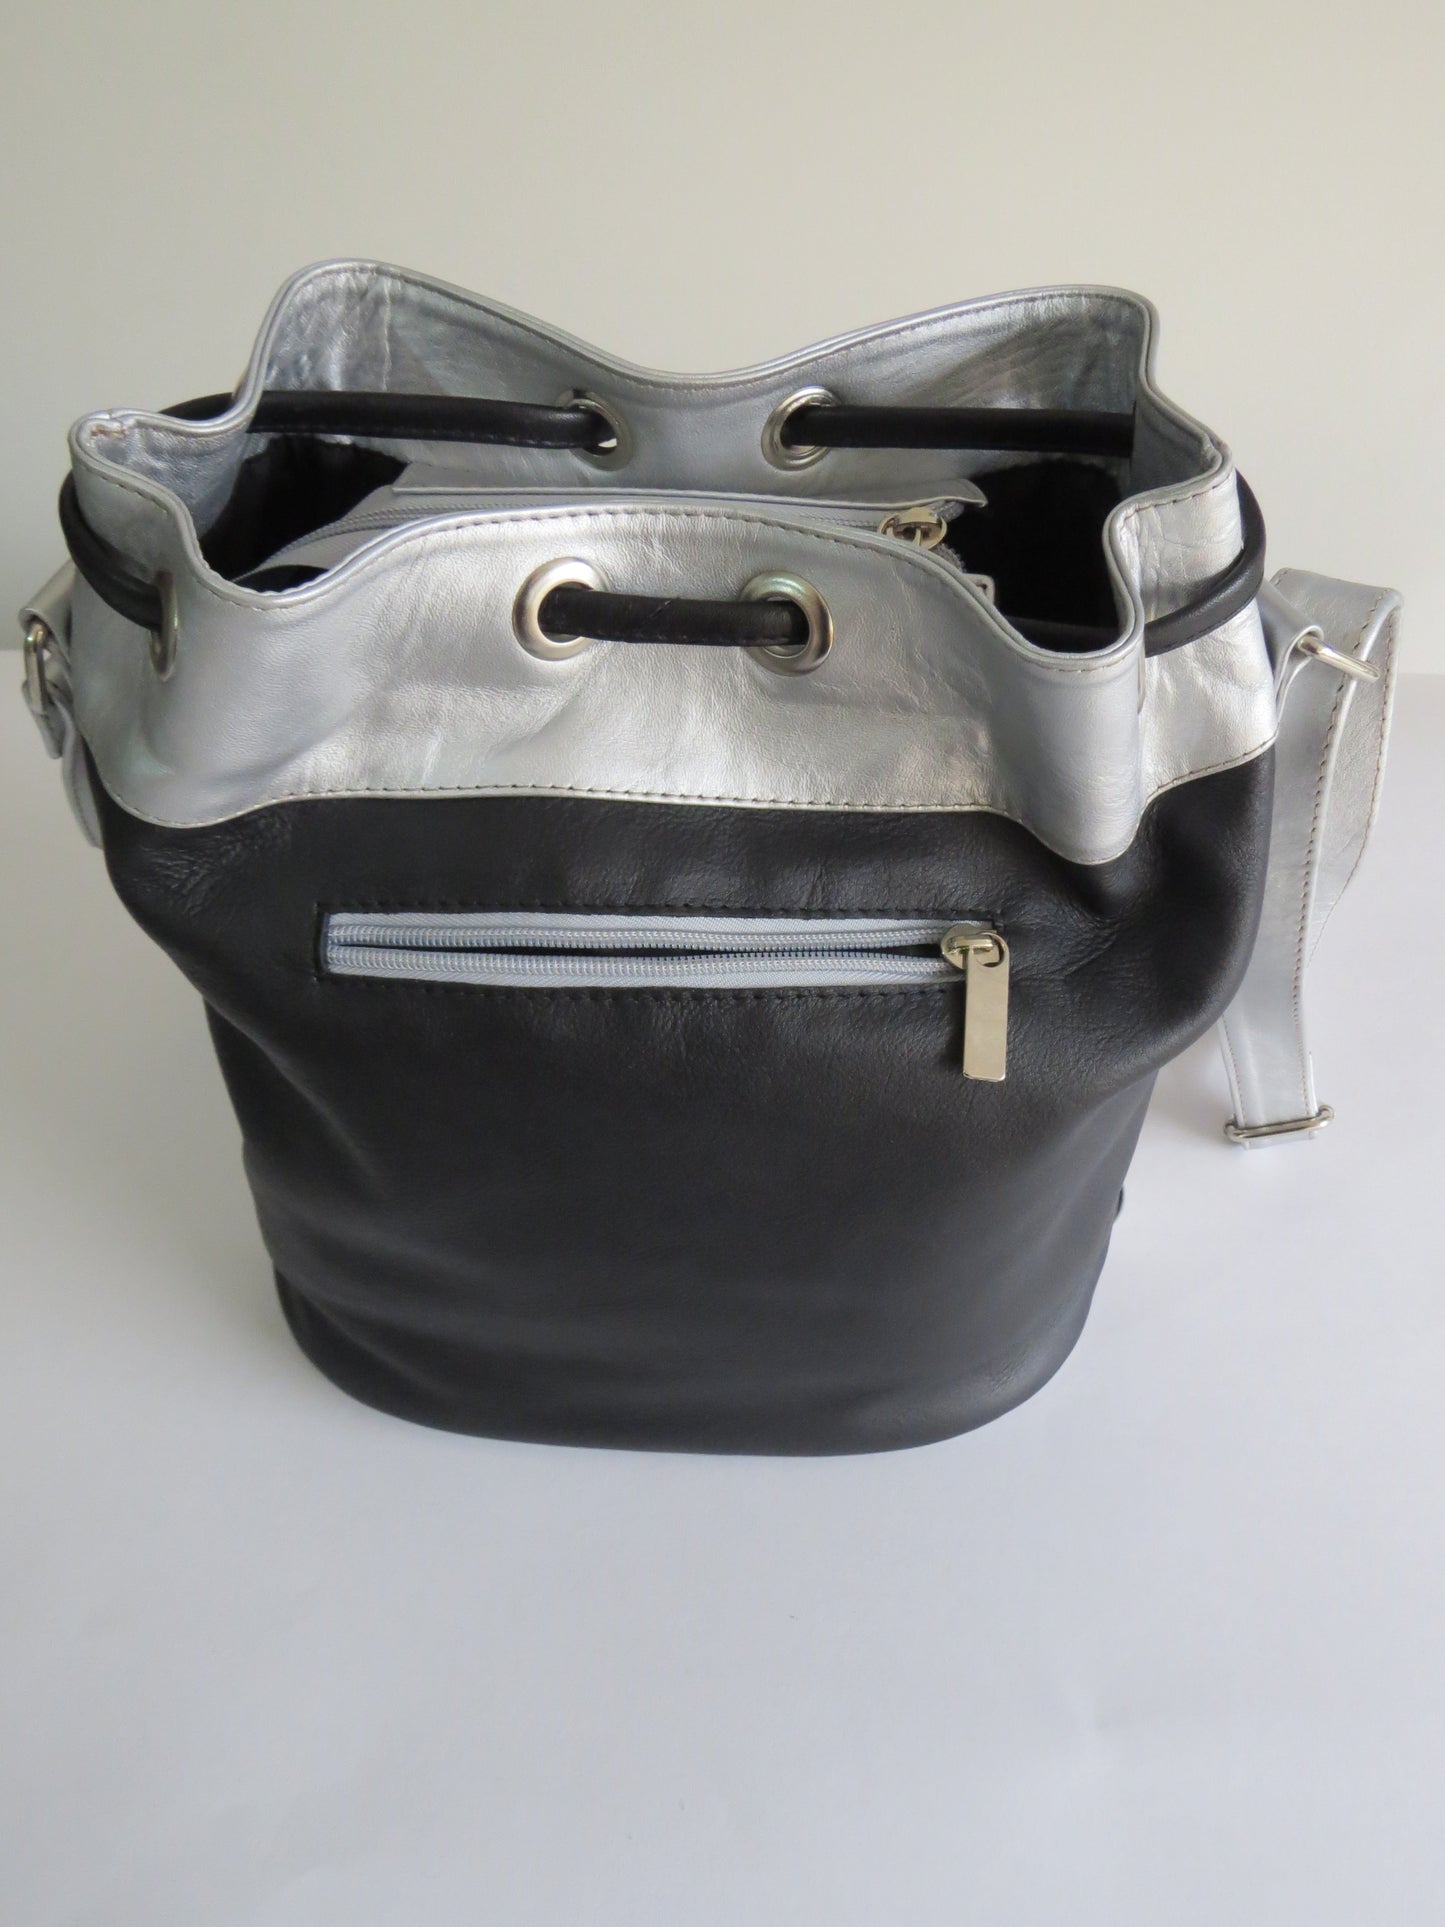 Silver and Black Purse, Large Leather Bag